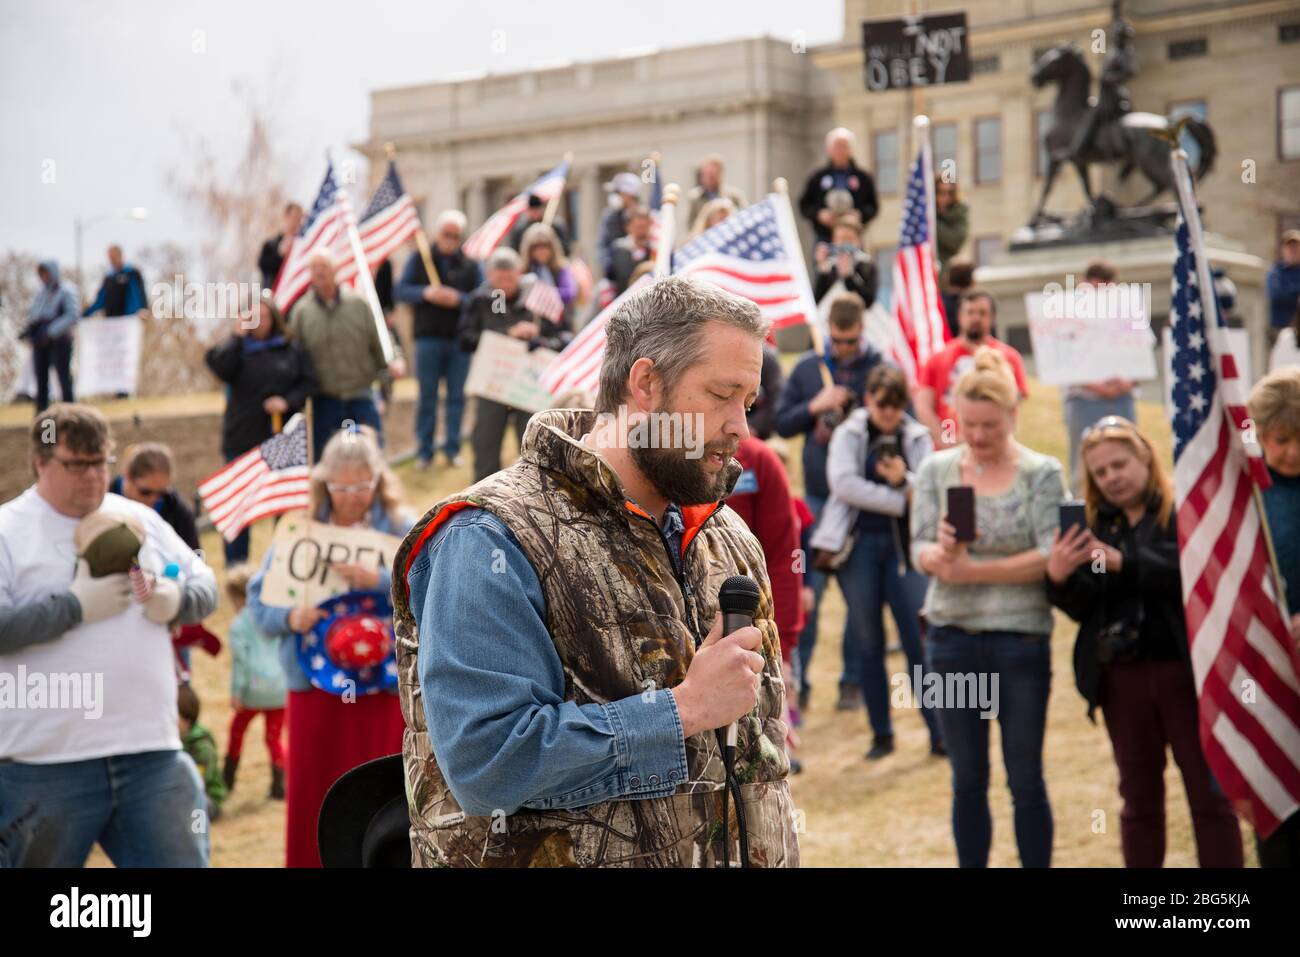 Helena, Montana - April 19, 2020: A man speaking and praying at a protest liberty rally at the Capitol again the shutdown due to Coronavirus. A crowd Stock Photo